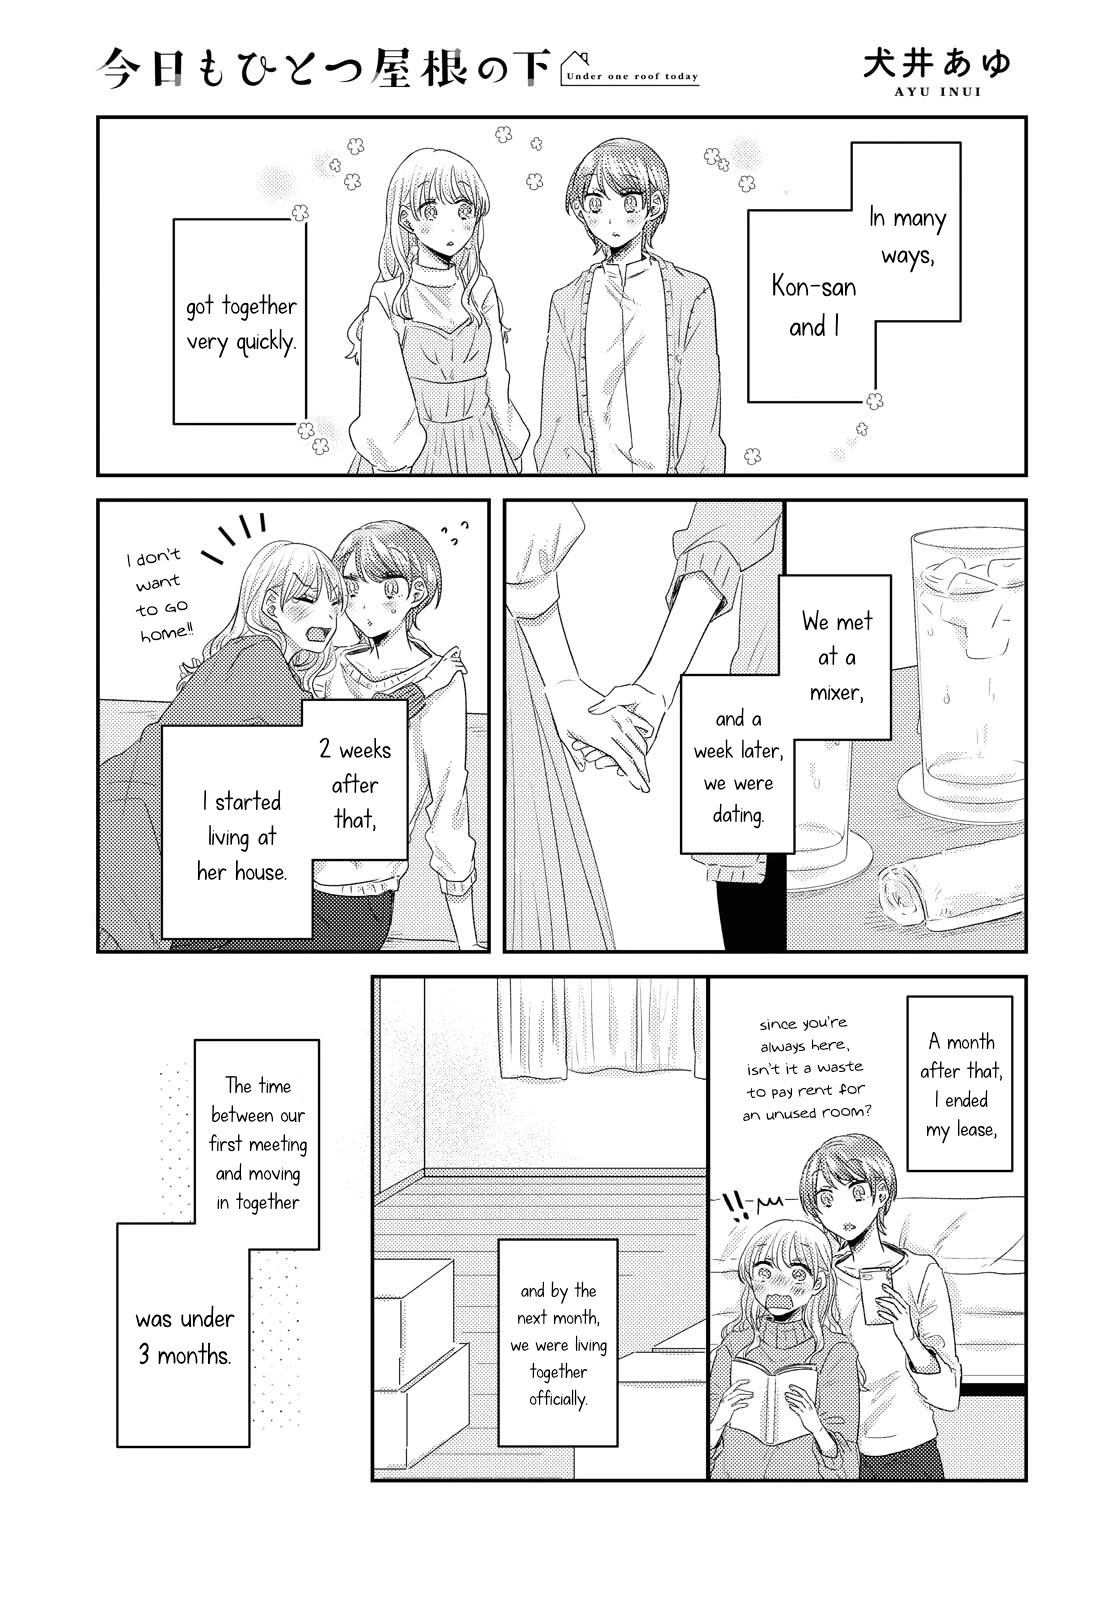 Today, We Continue Our Lives Together Under The Same Roof - Page 1